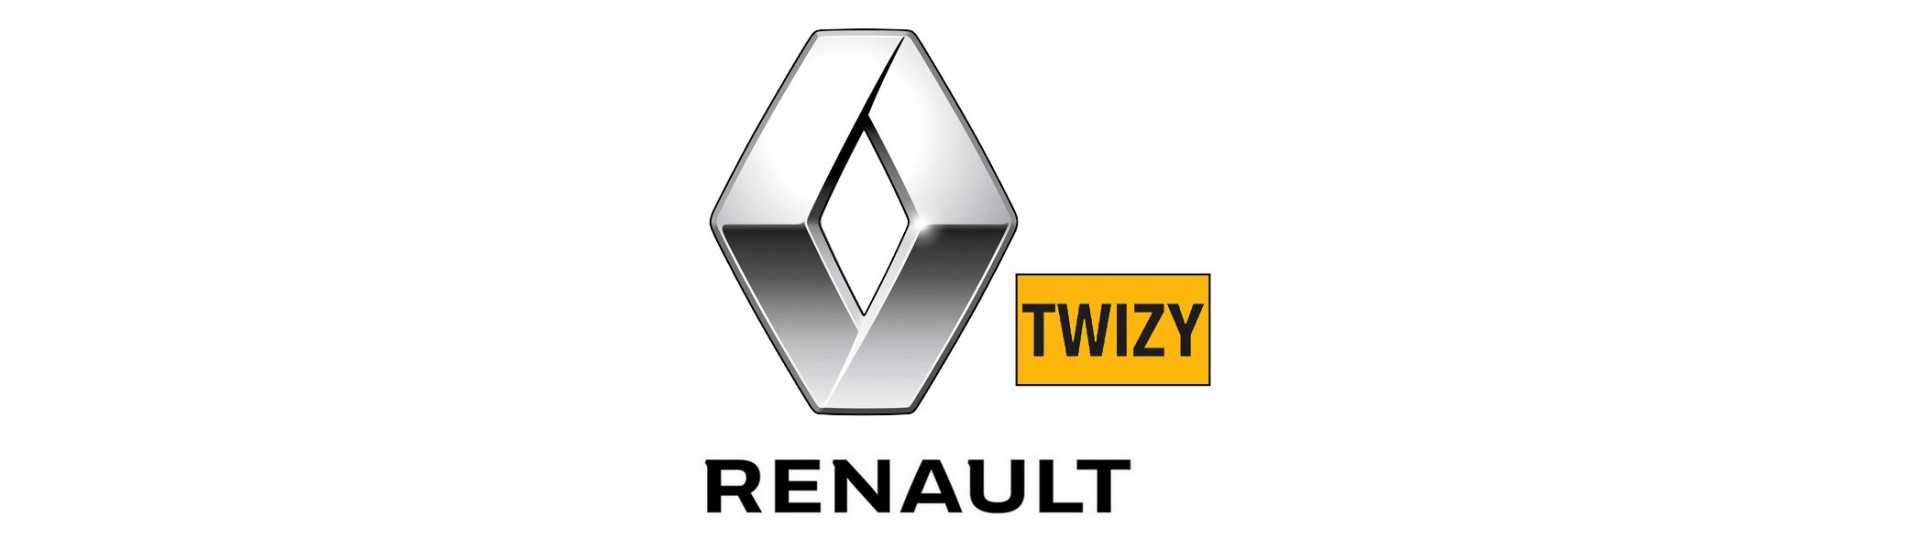 Best price indicator for car without a permit Renault Twizy